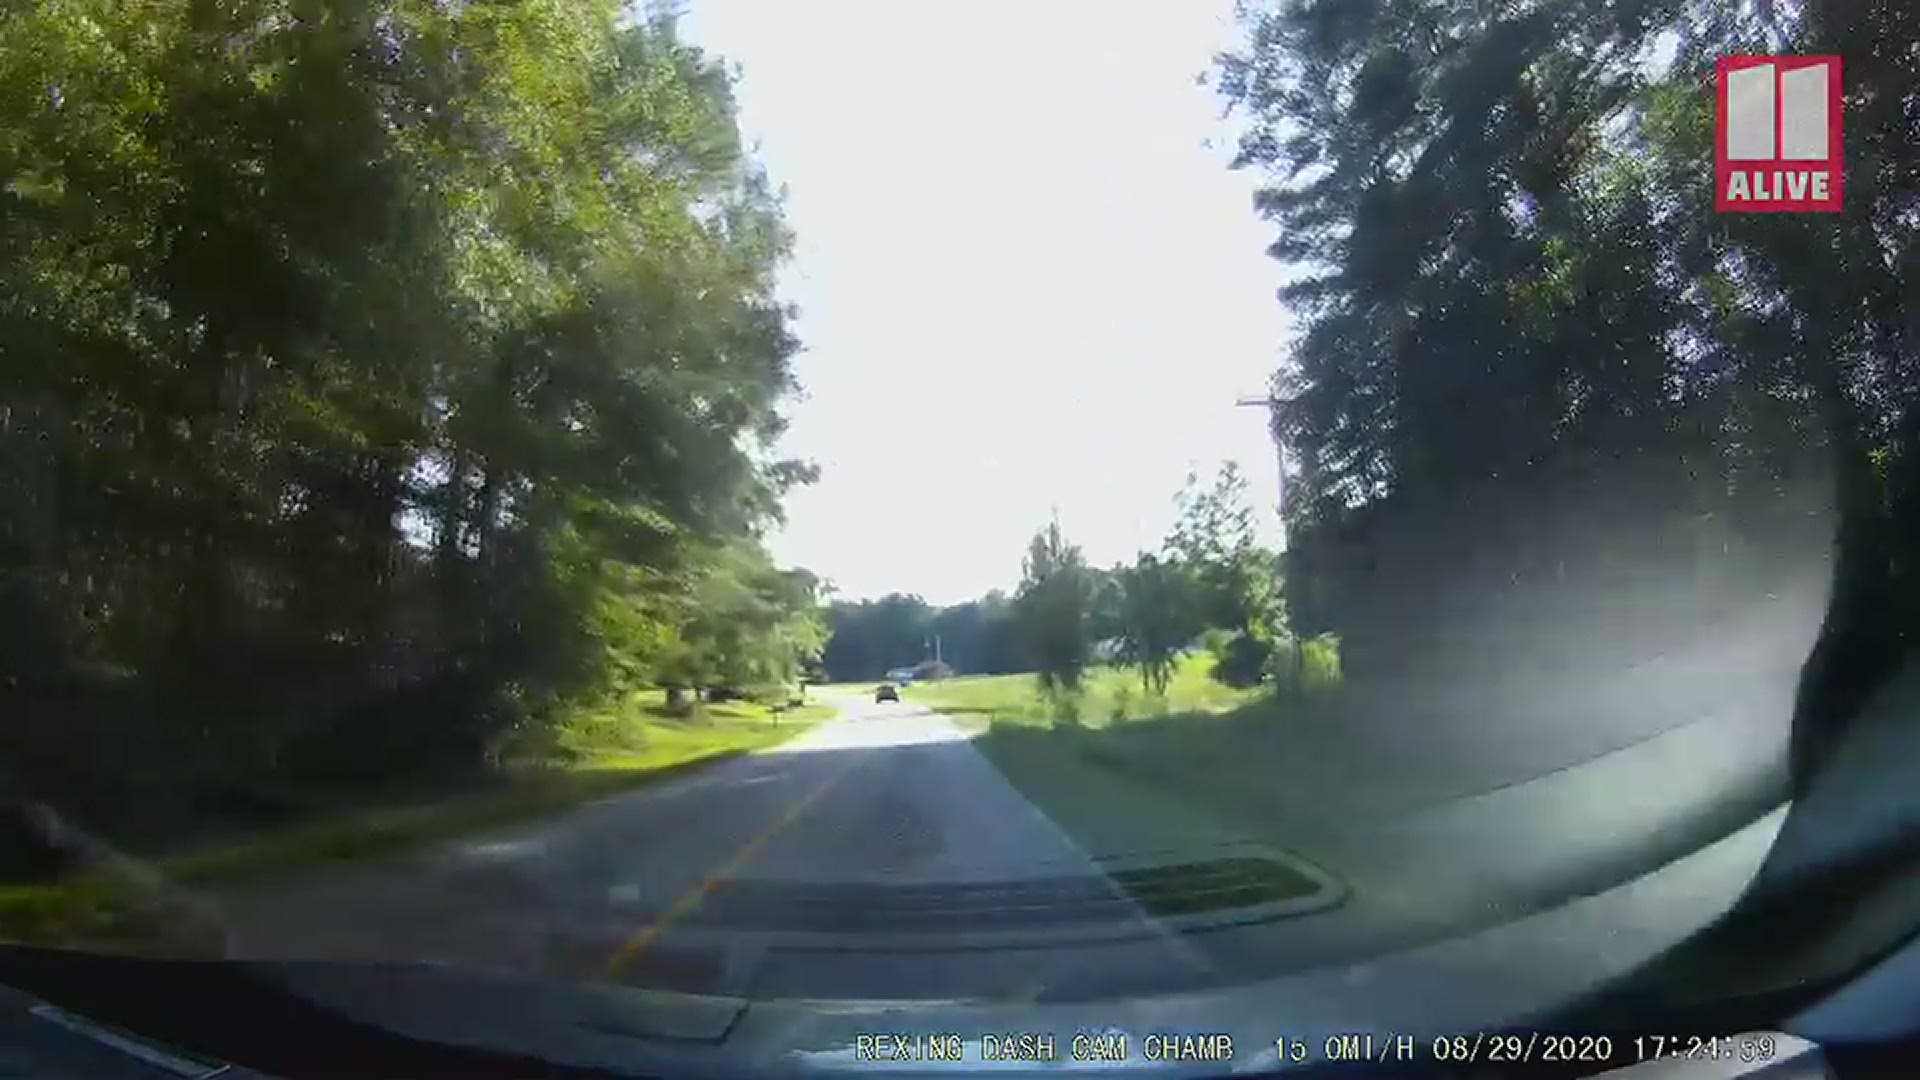 A police dashcam shows the moment when Chamblee officers stopped the alleged kidnappers of a toddler were stopped in Carrollton, Ga., on Saturday, August 29, 2020.